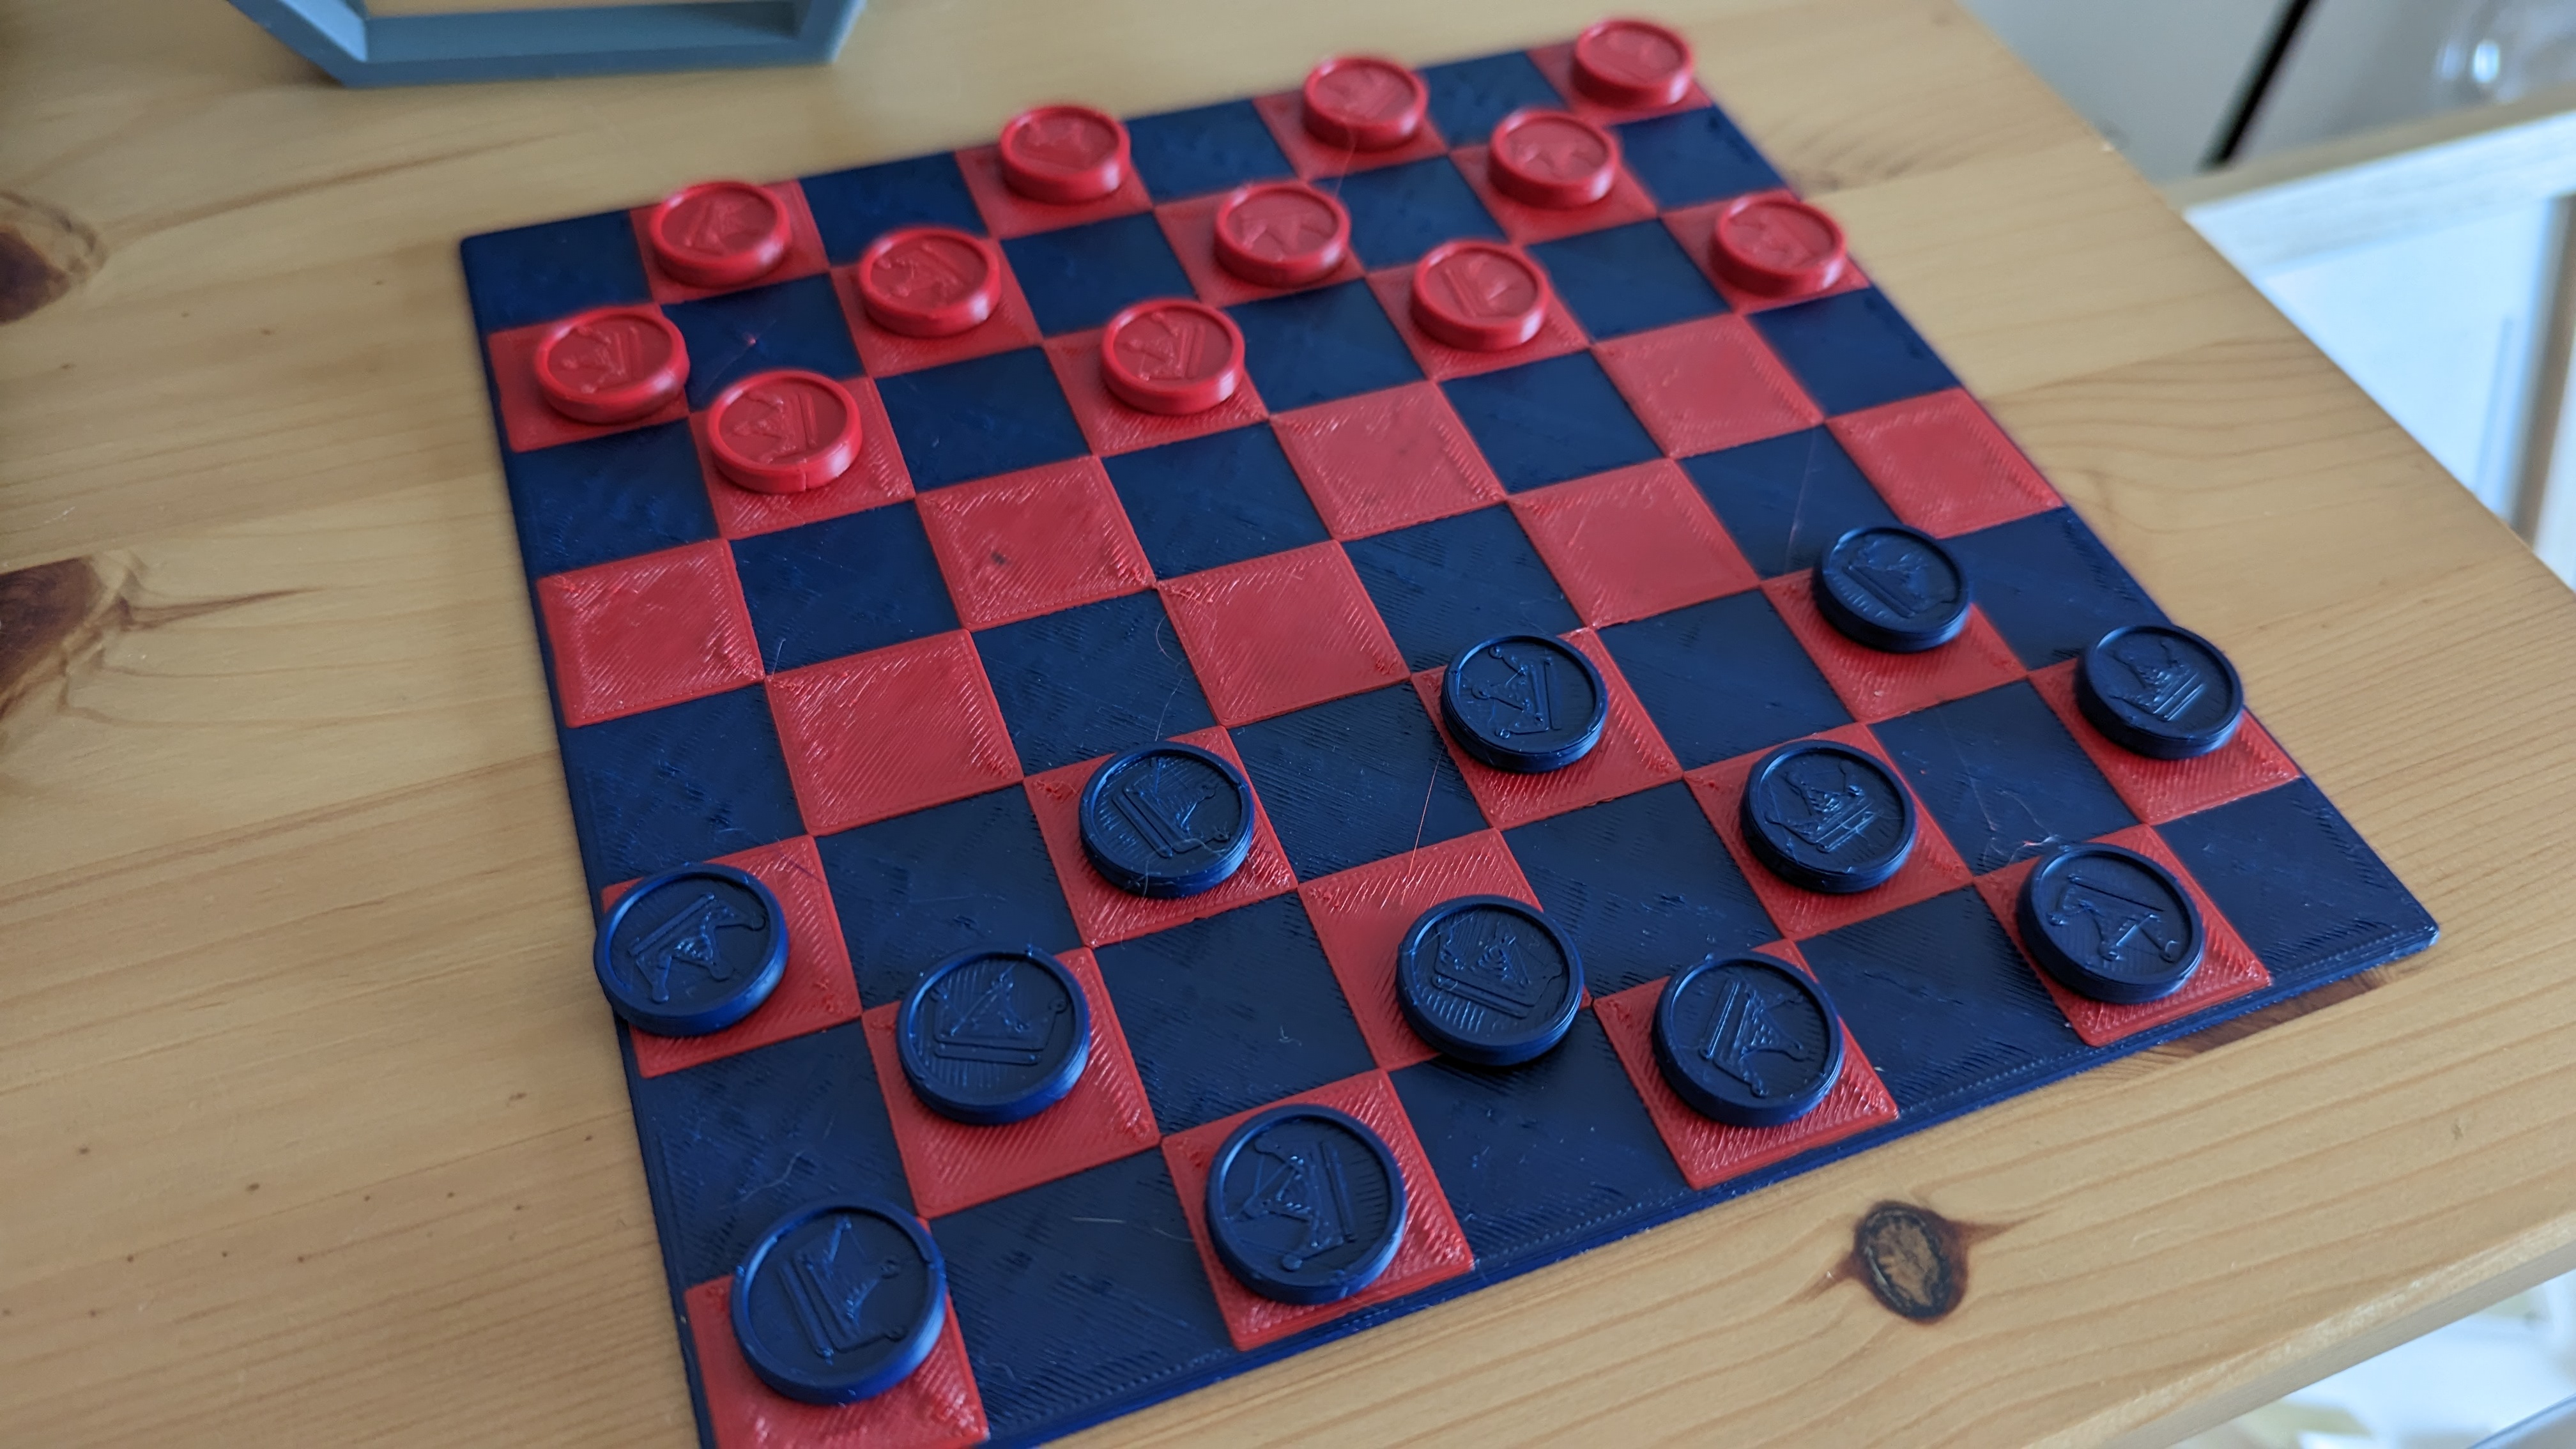 Checkers game by Biny | Download free STL model | Printables.com